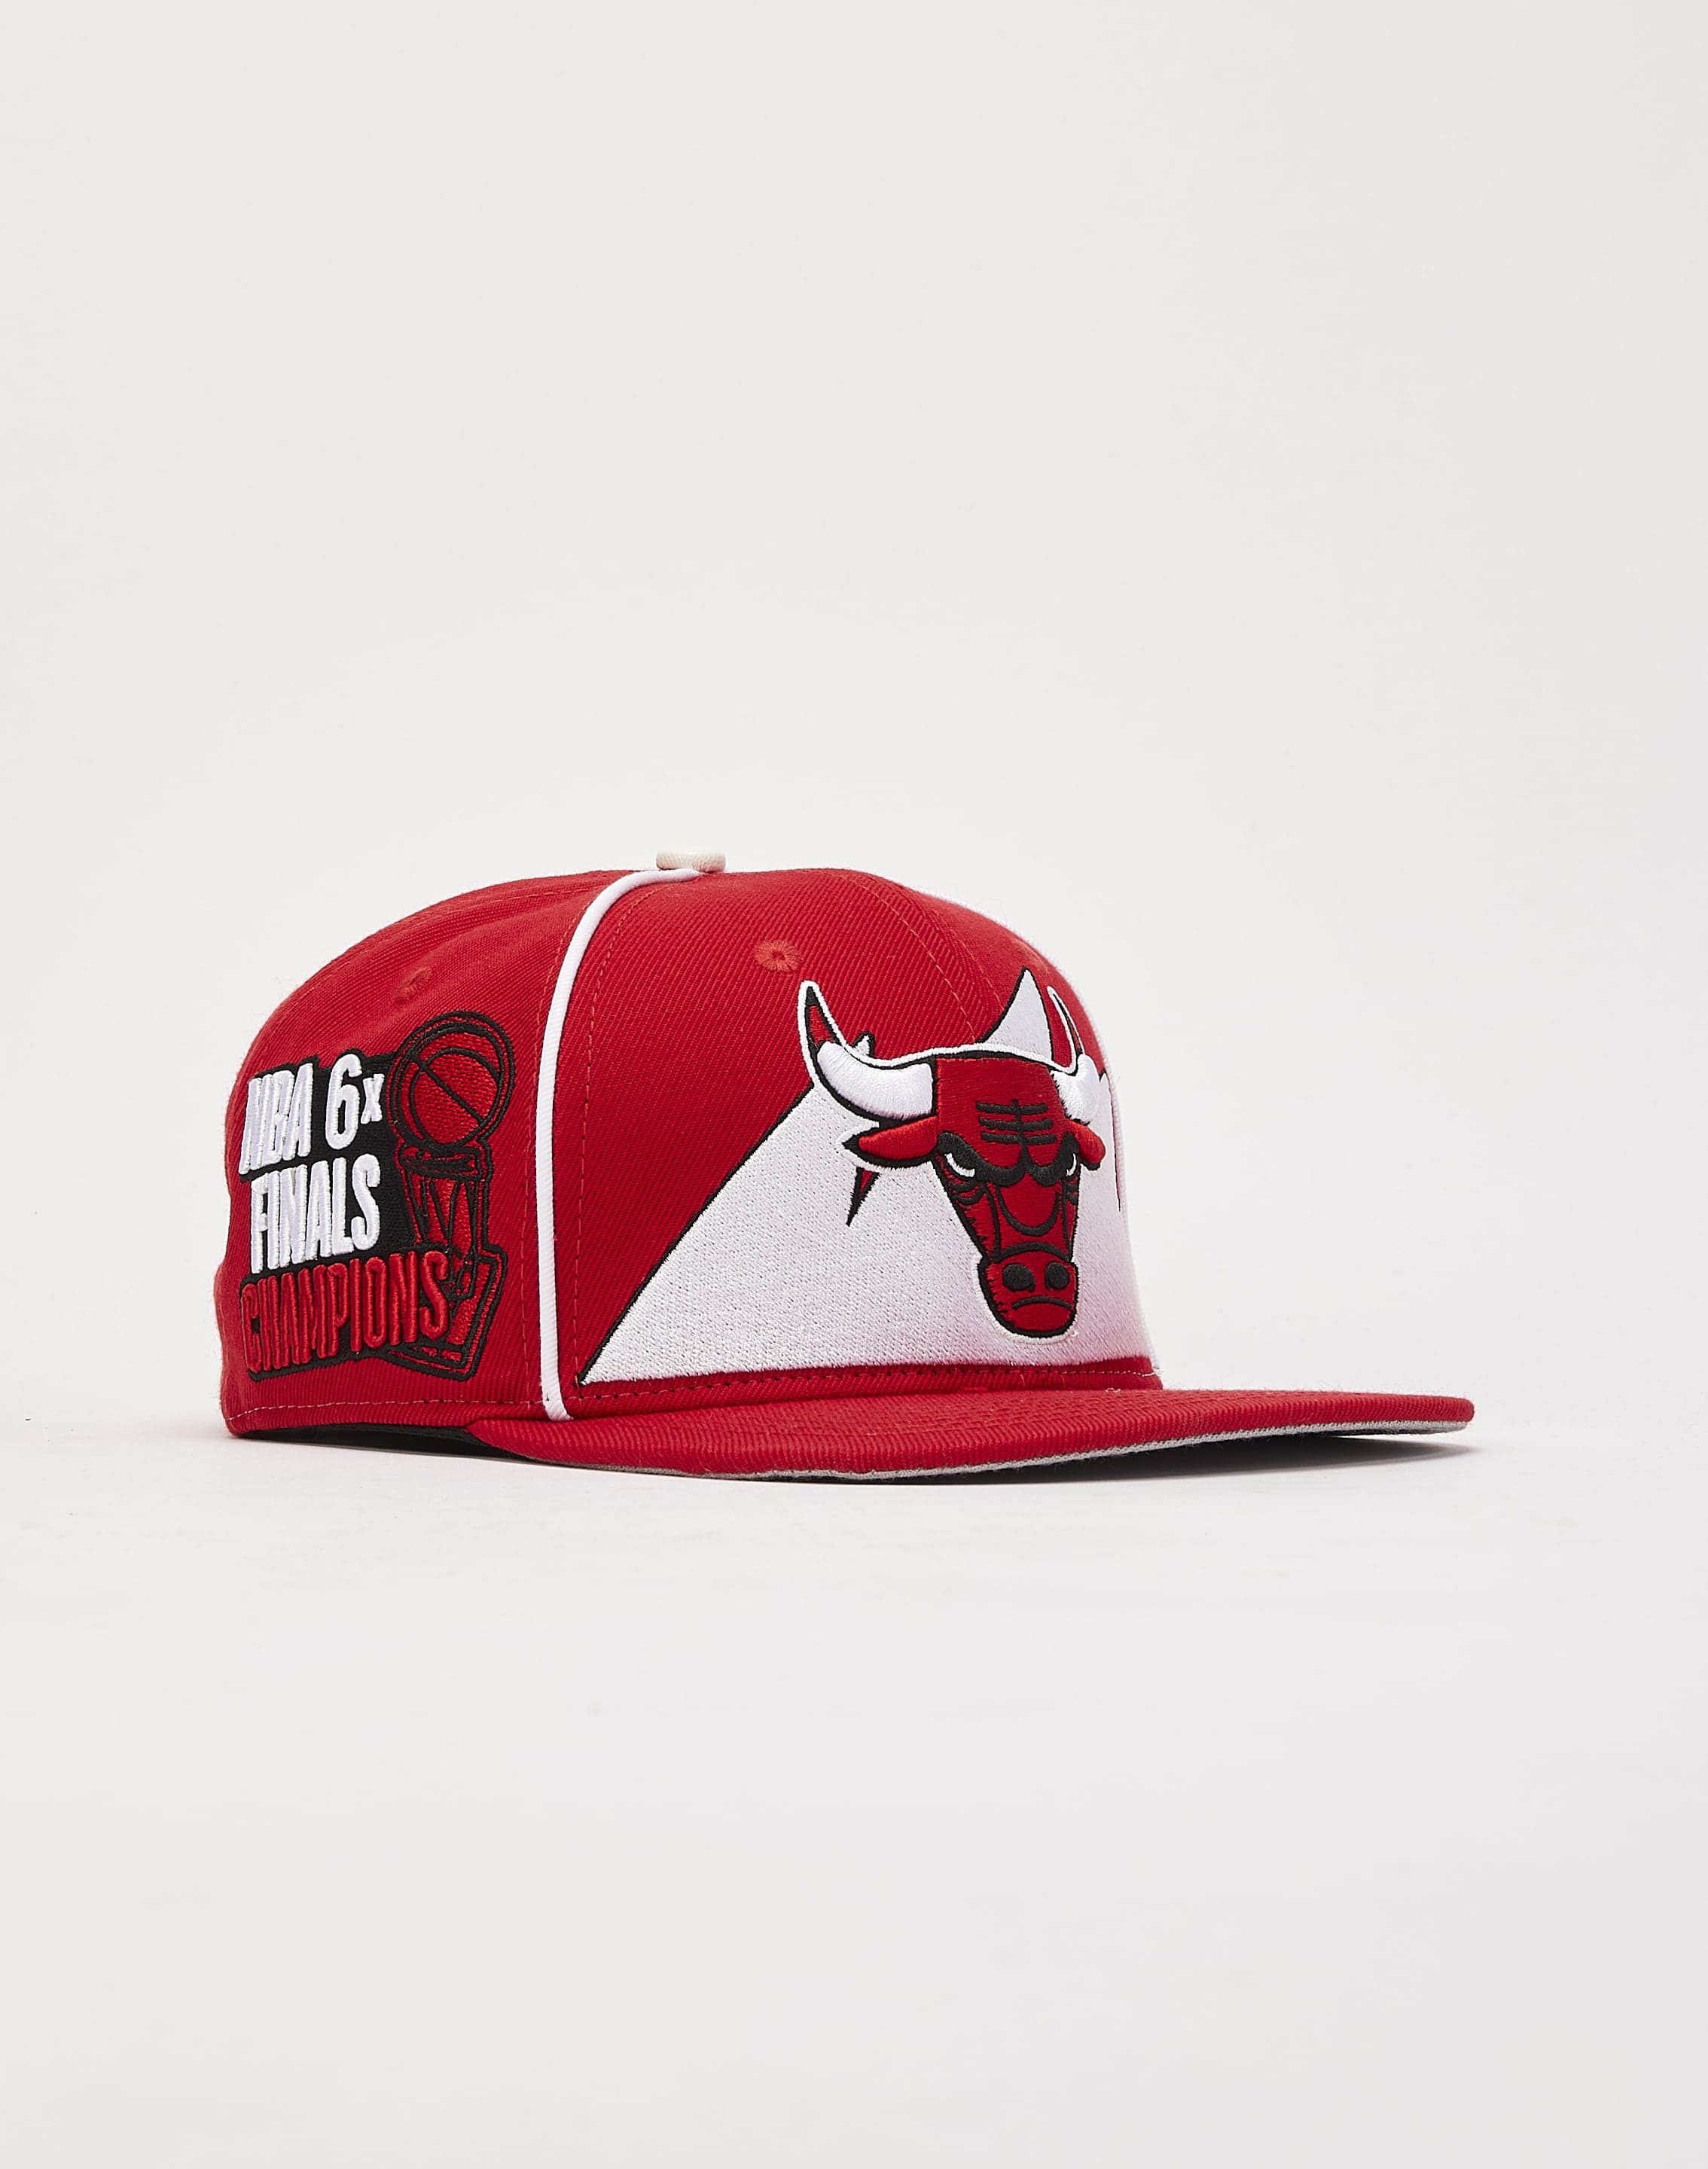 Pro Standard Bulls 2-Tone Logo Snapback Hat in White/Red One Size | WSS